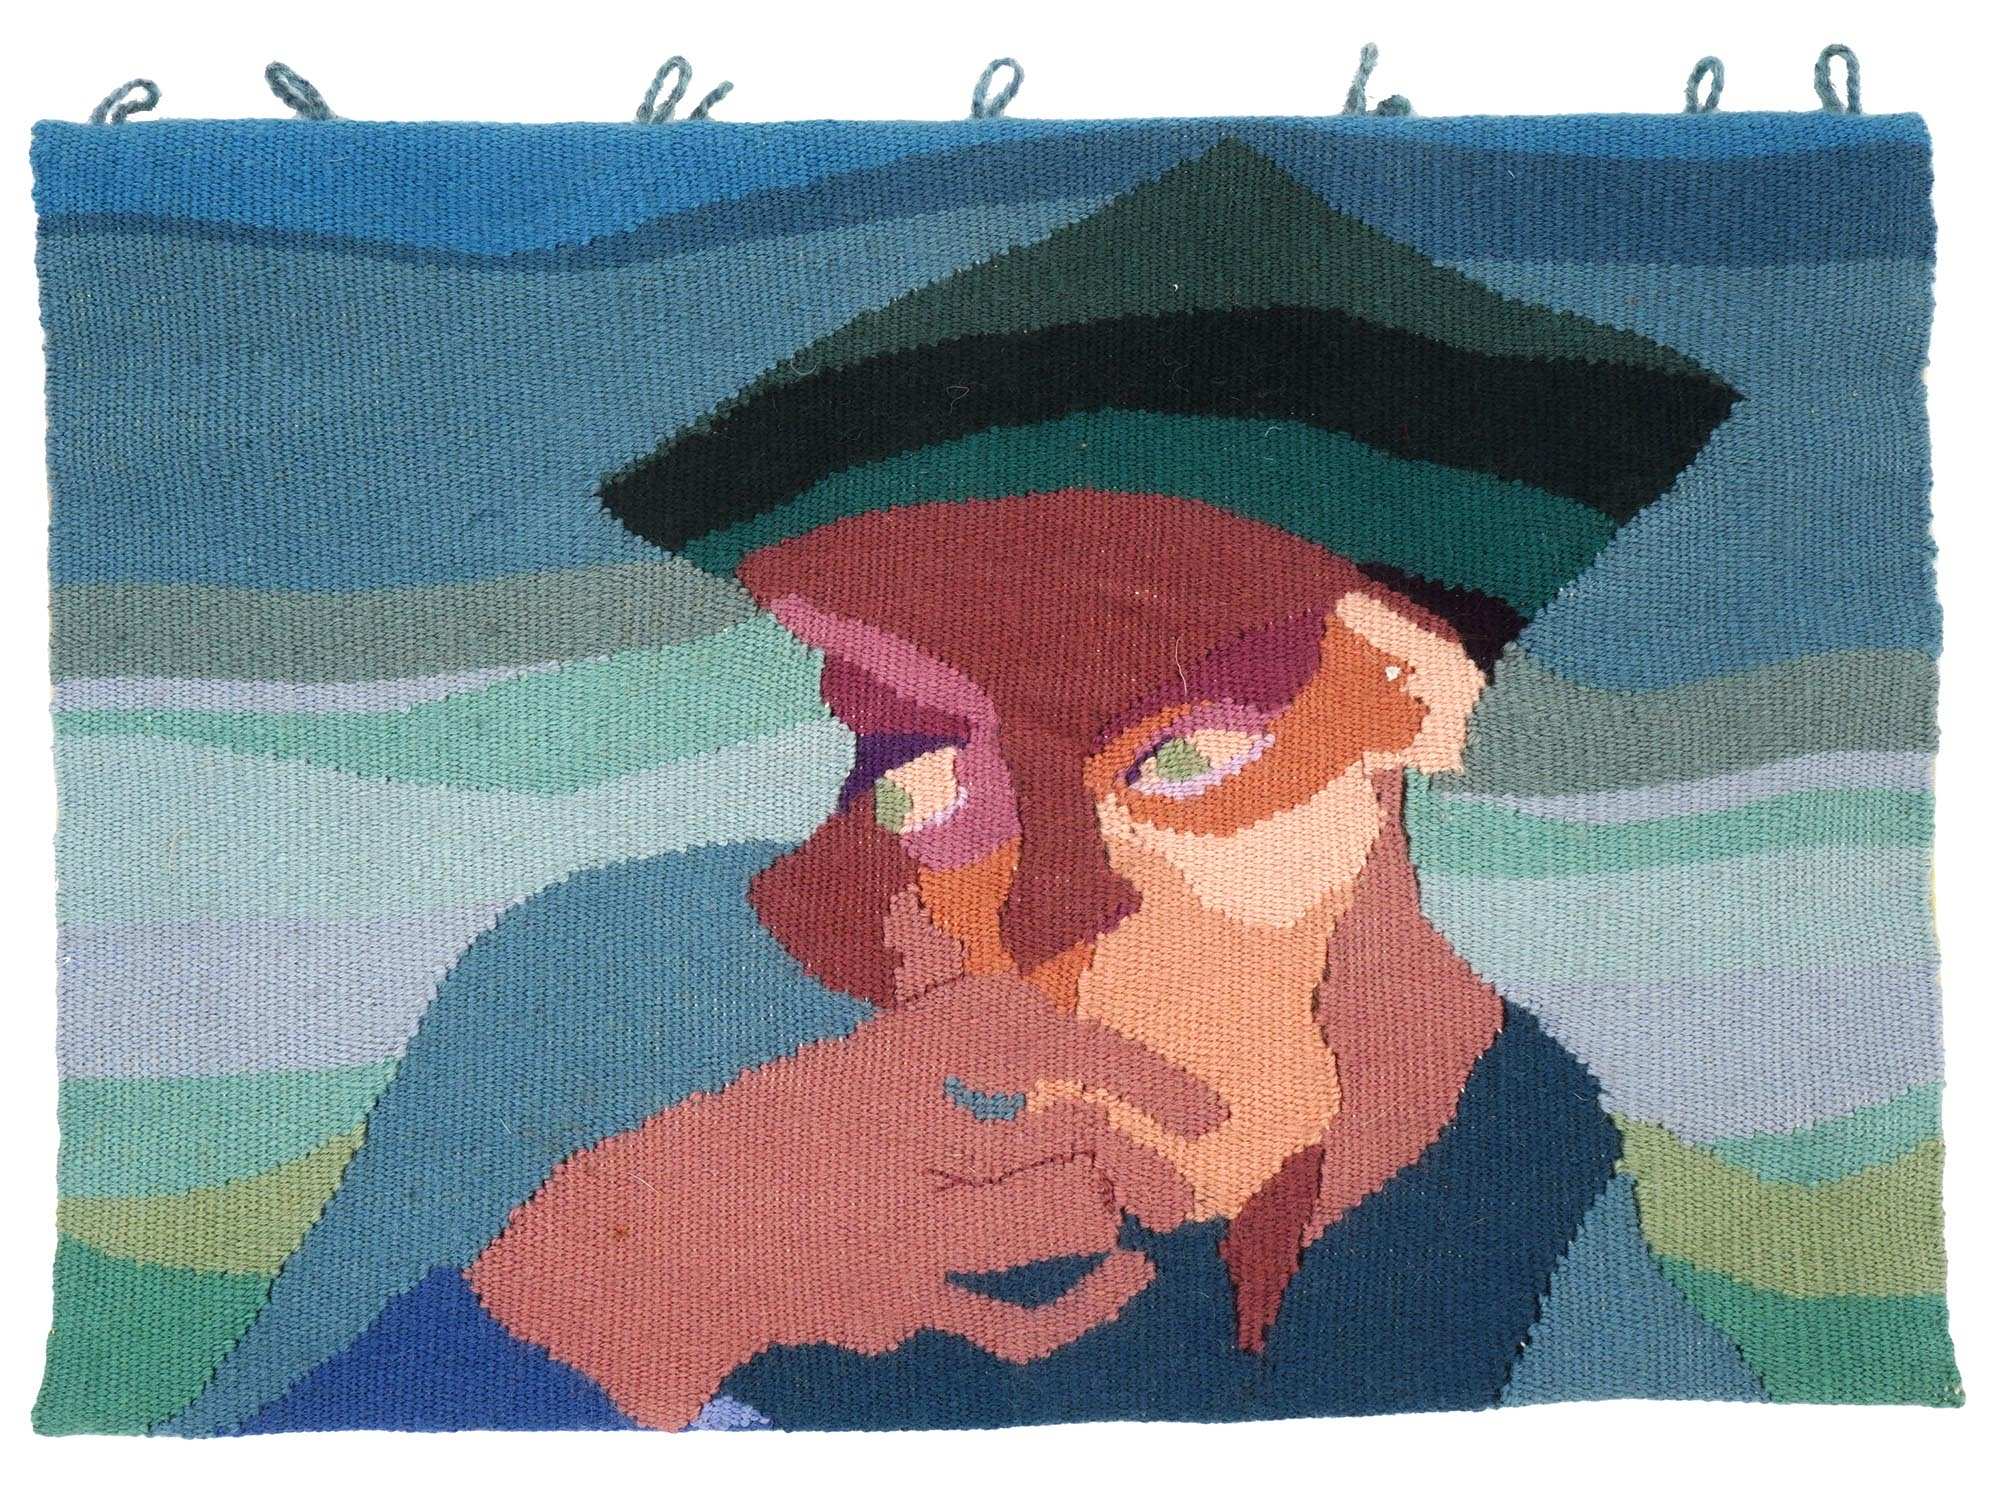 VINTAGE HAND EMBROIDERED ART TAPESTRY W PORTRAIT PIC-0